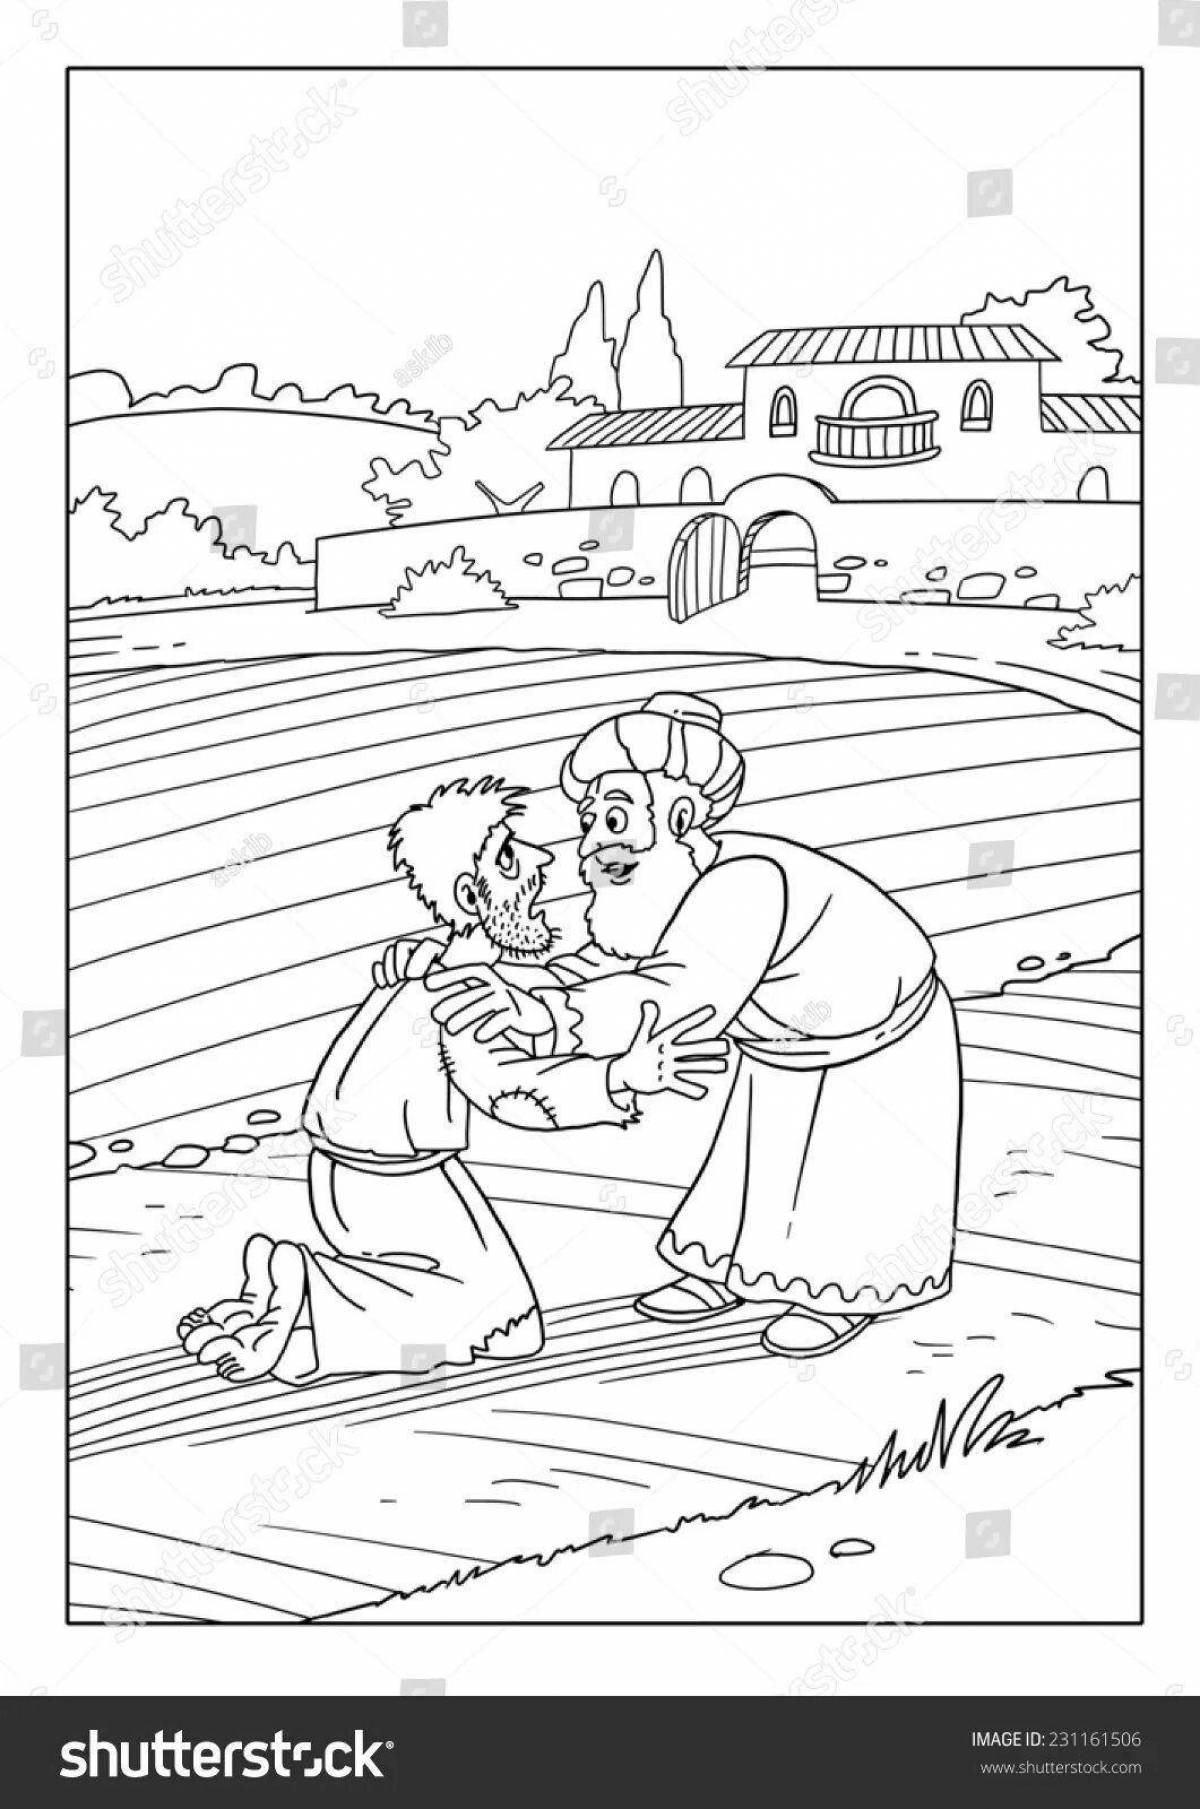 Whimsical week of the prodigal son coloring book